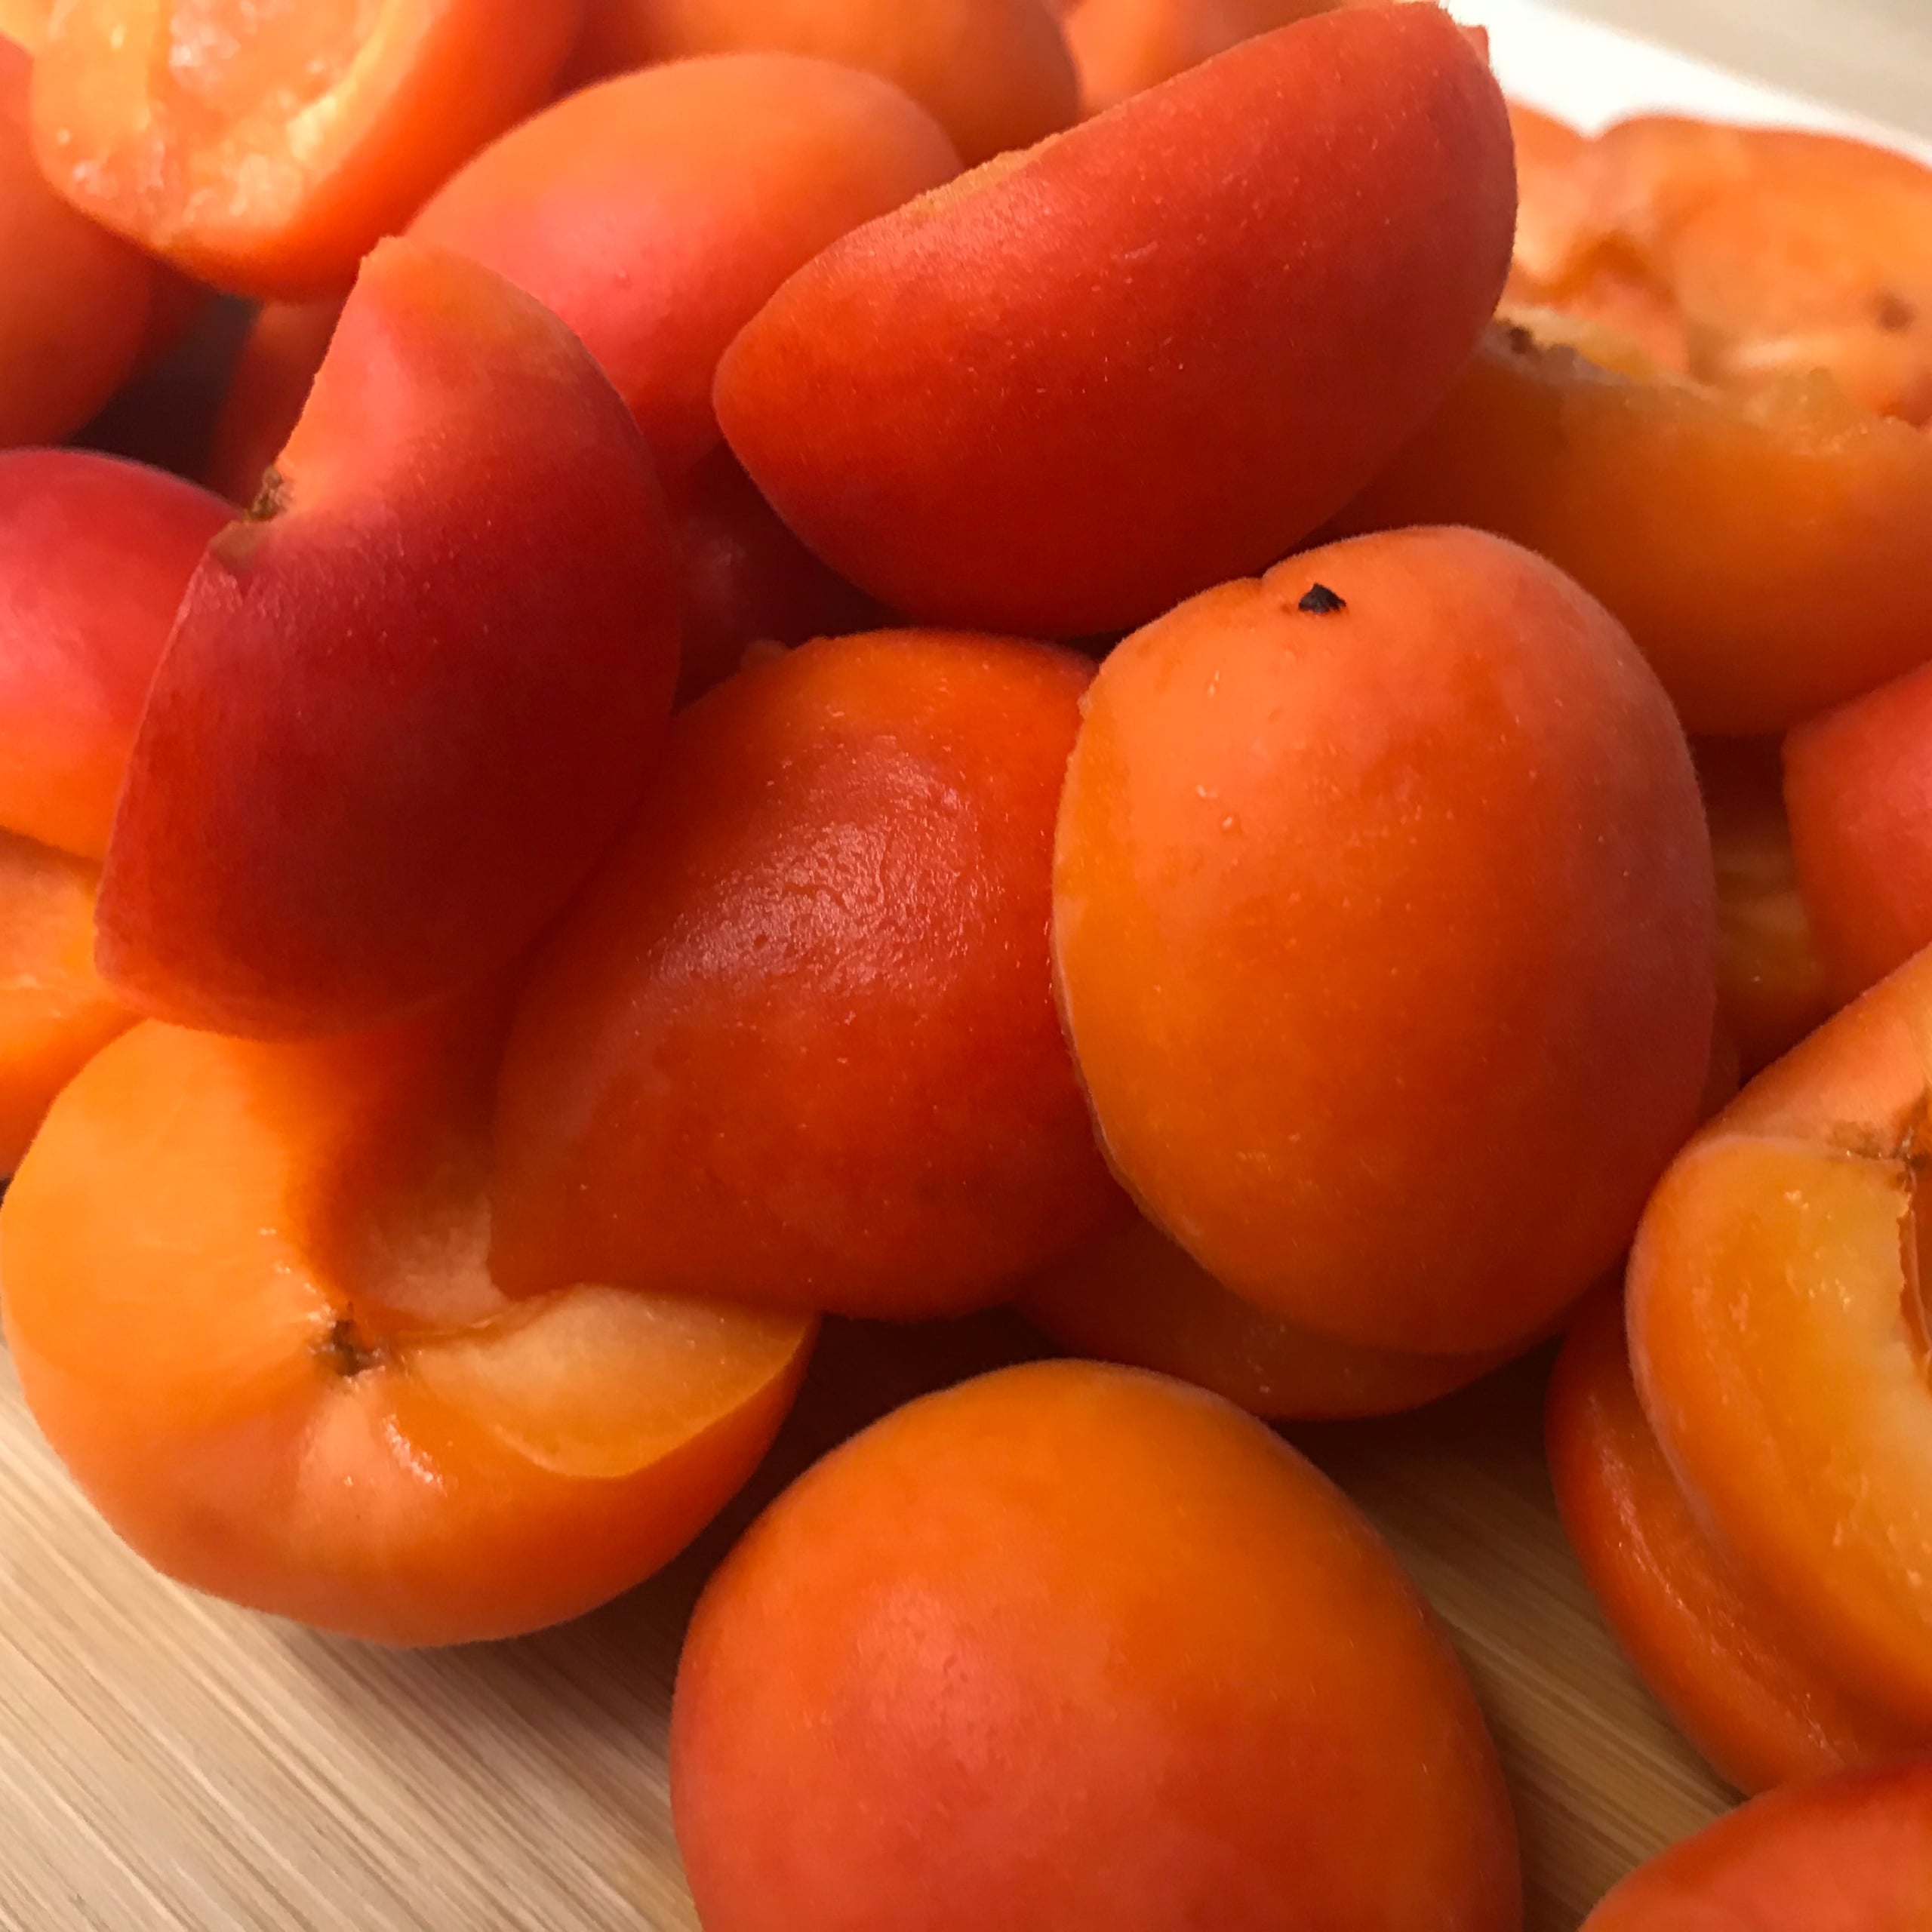 Apricot Jam and Sauce | My Curated Tastes